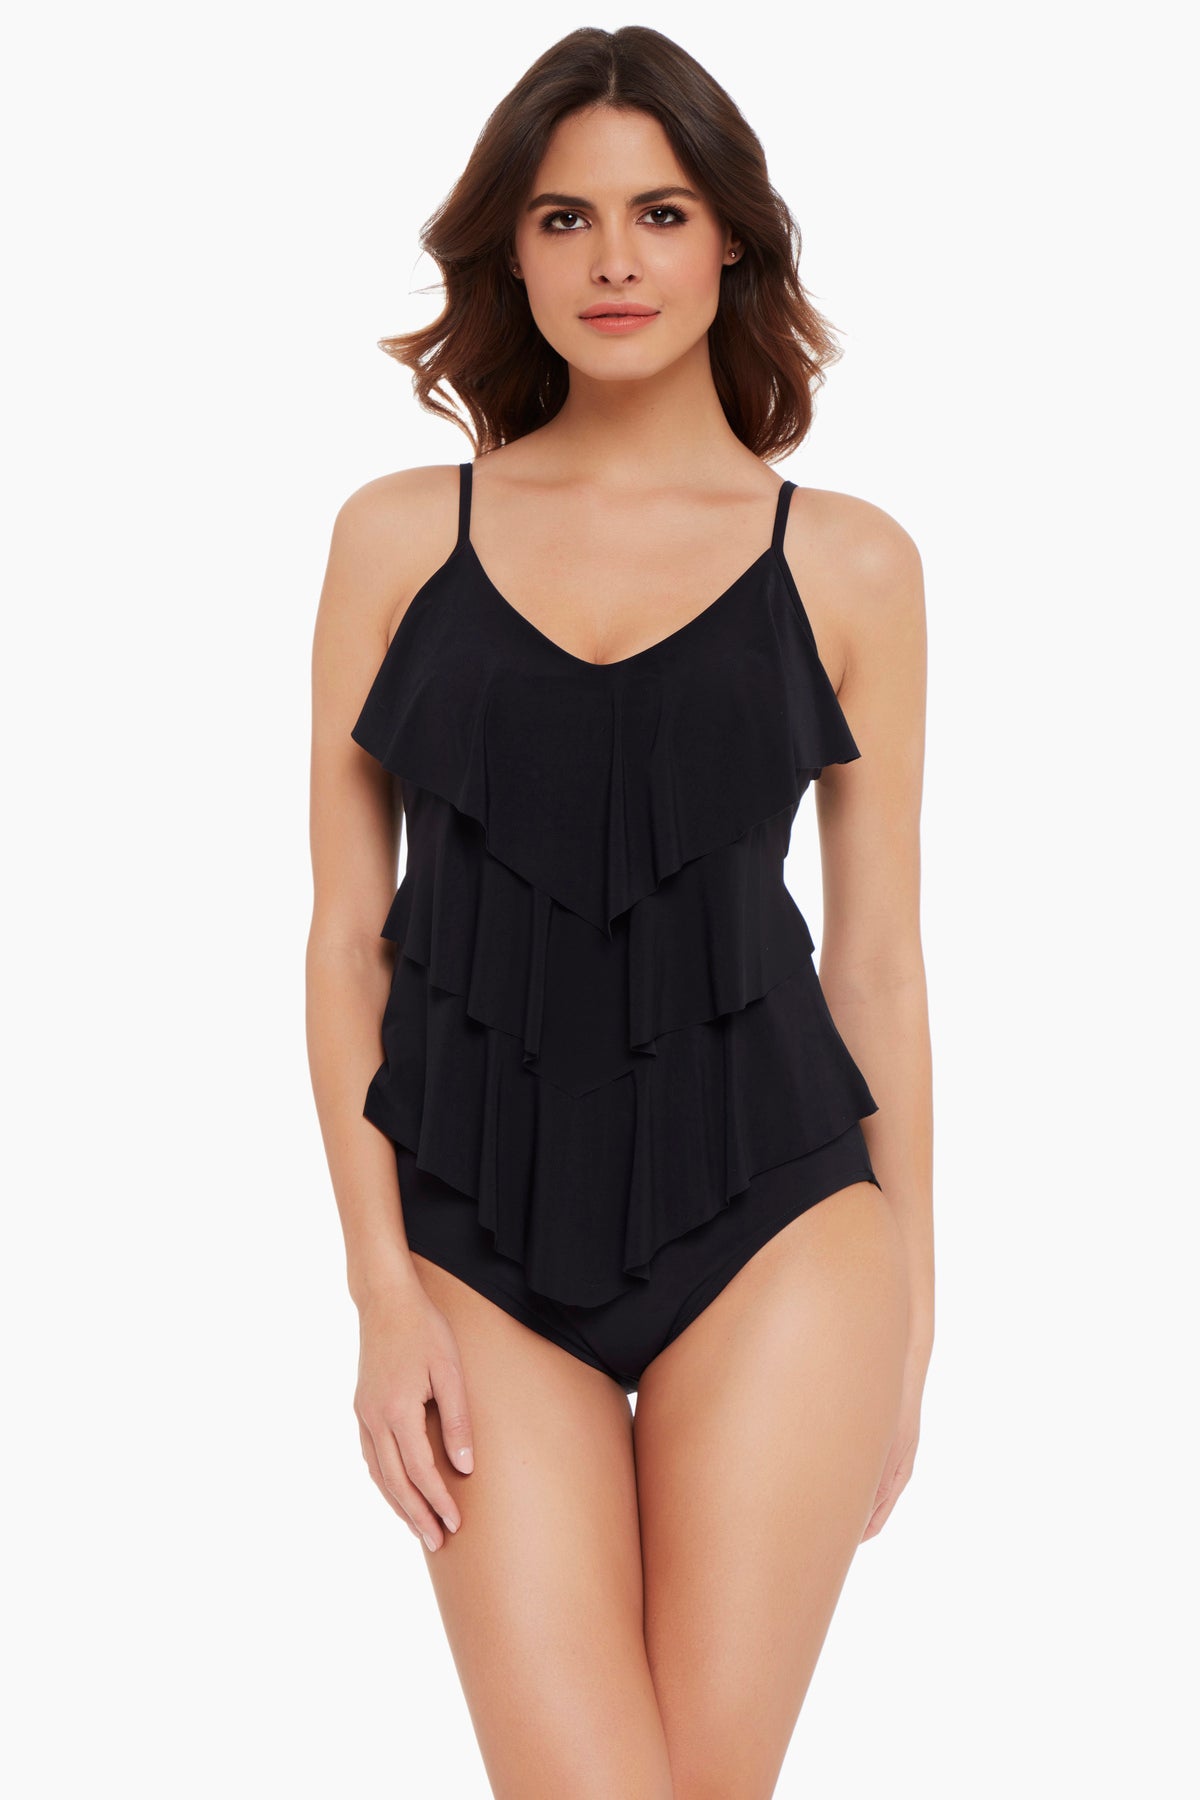 Miraclesuit Tempest Mirage Tankini Top DD-Cup